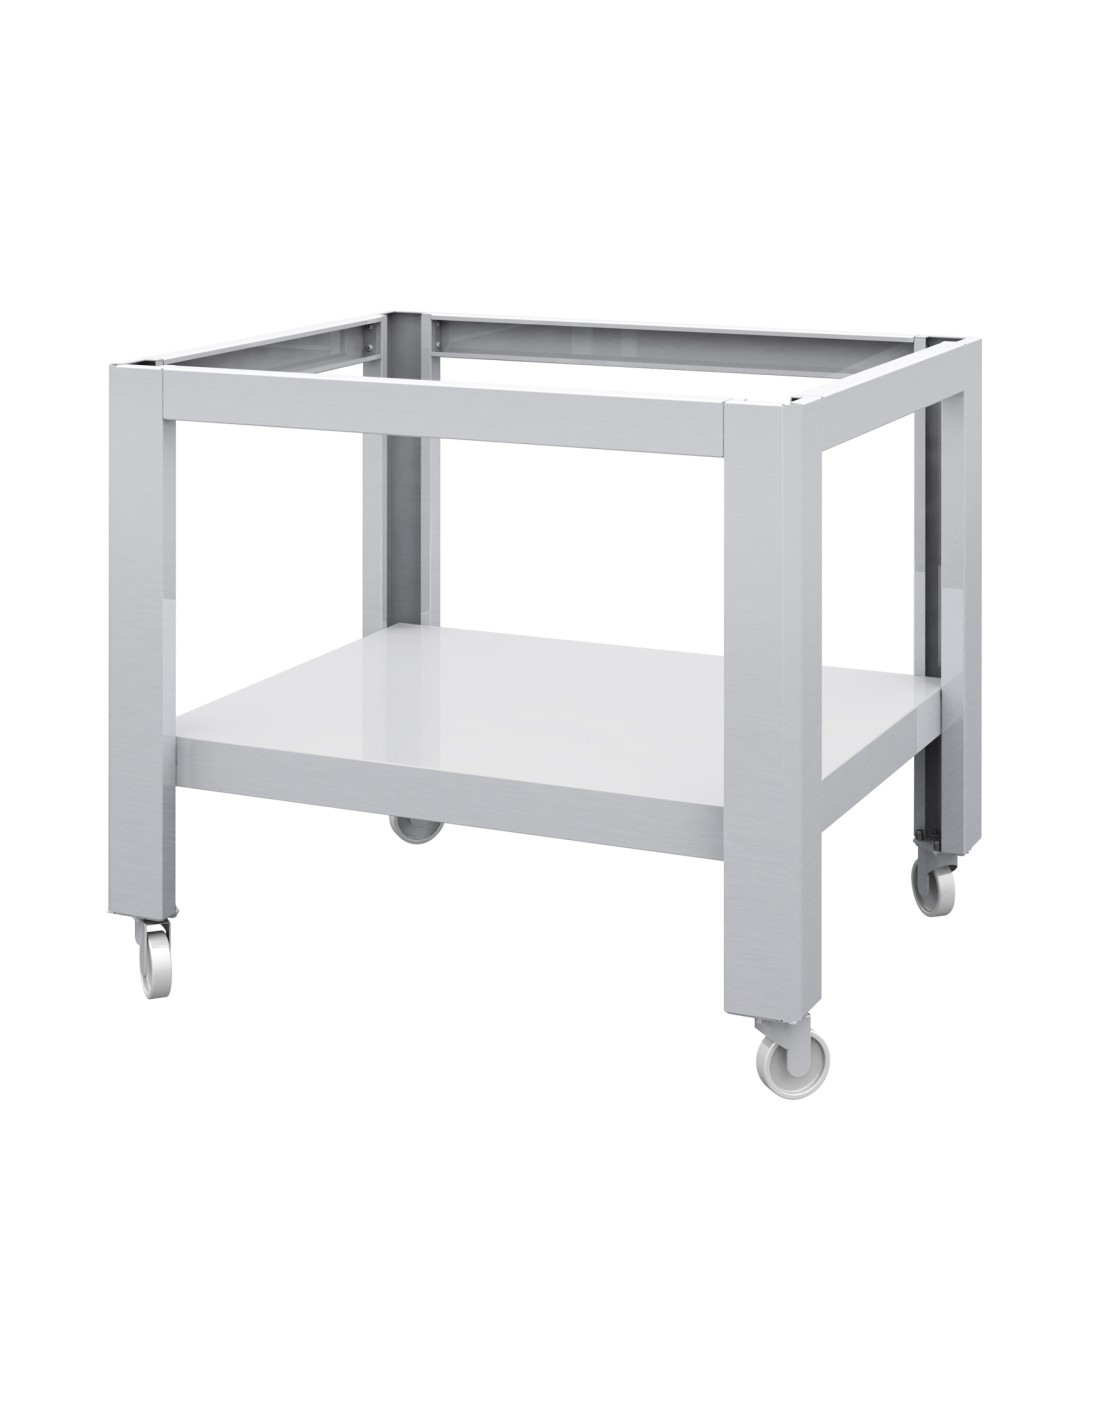 Support in stainless steel - Dimensions cm 146 x 92 x 99 h